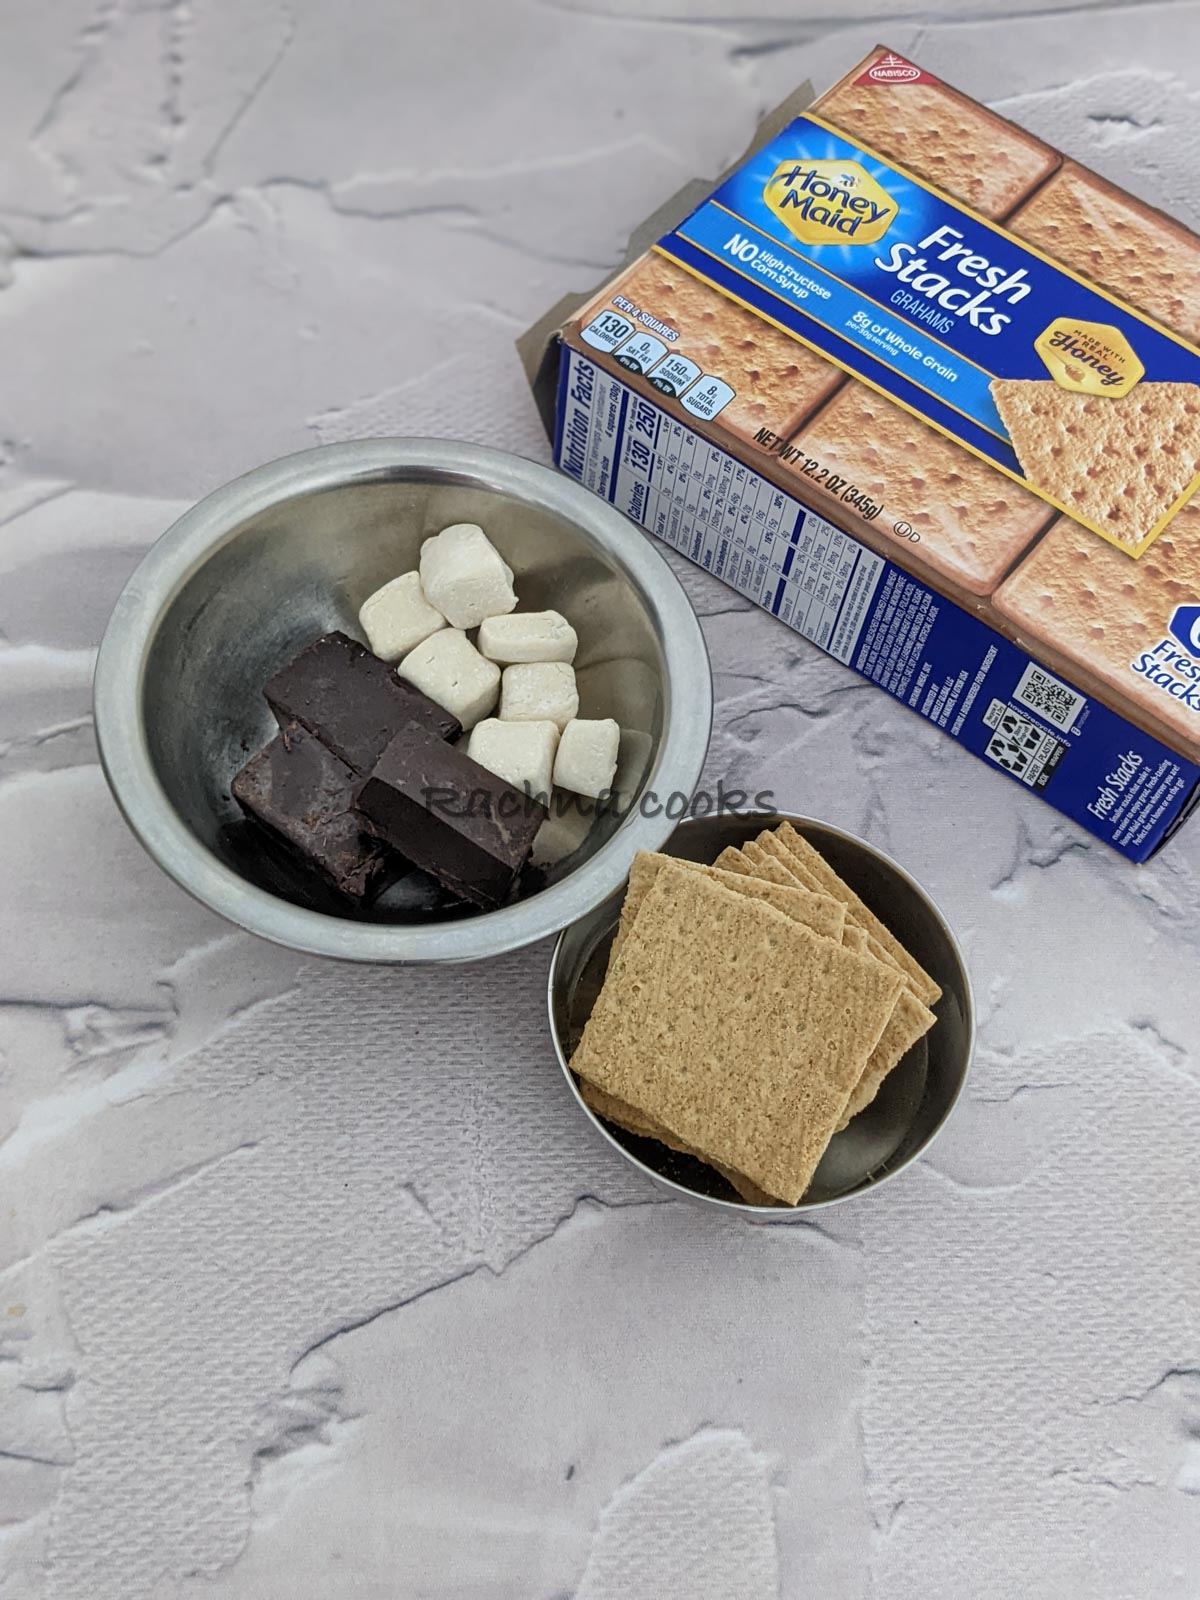 Crackers in a bowl, marshmallows and chocolate bars in another bowl along with a pack of honey maid graham's crackers visible.